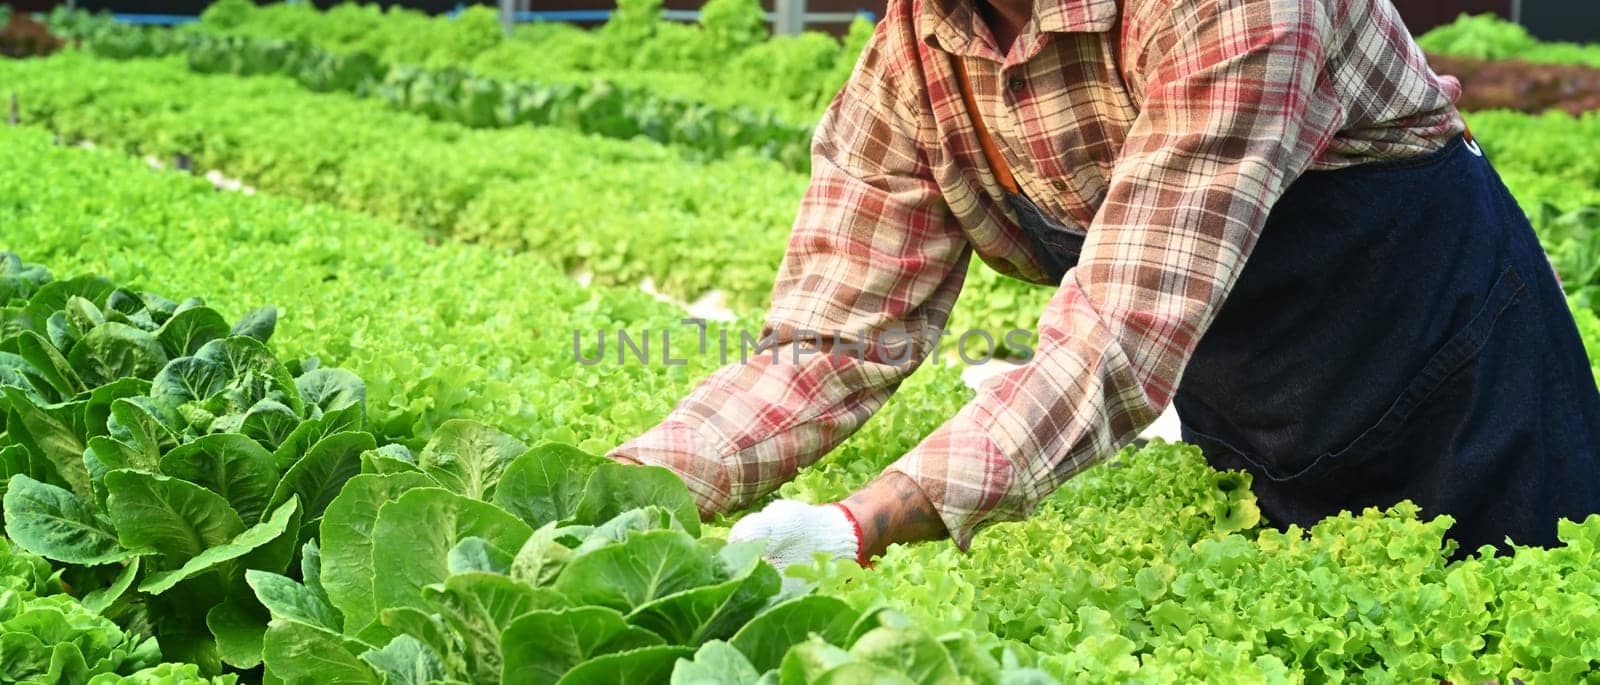 Cropped image of farmer working, arranging, sorting organic vegetables in sunny hydroponic greenhouse by prathanchorruangsak